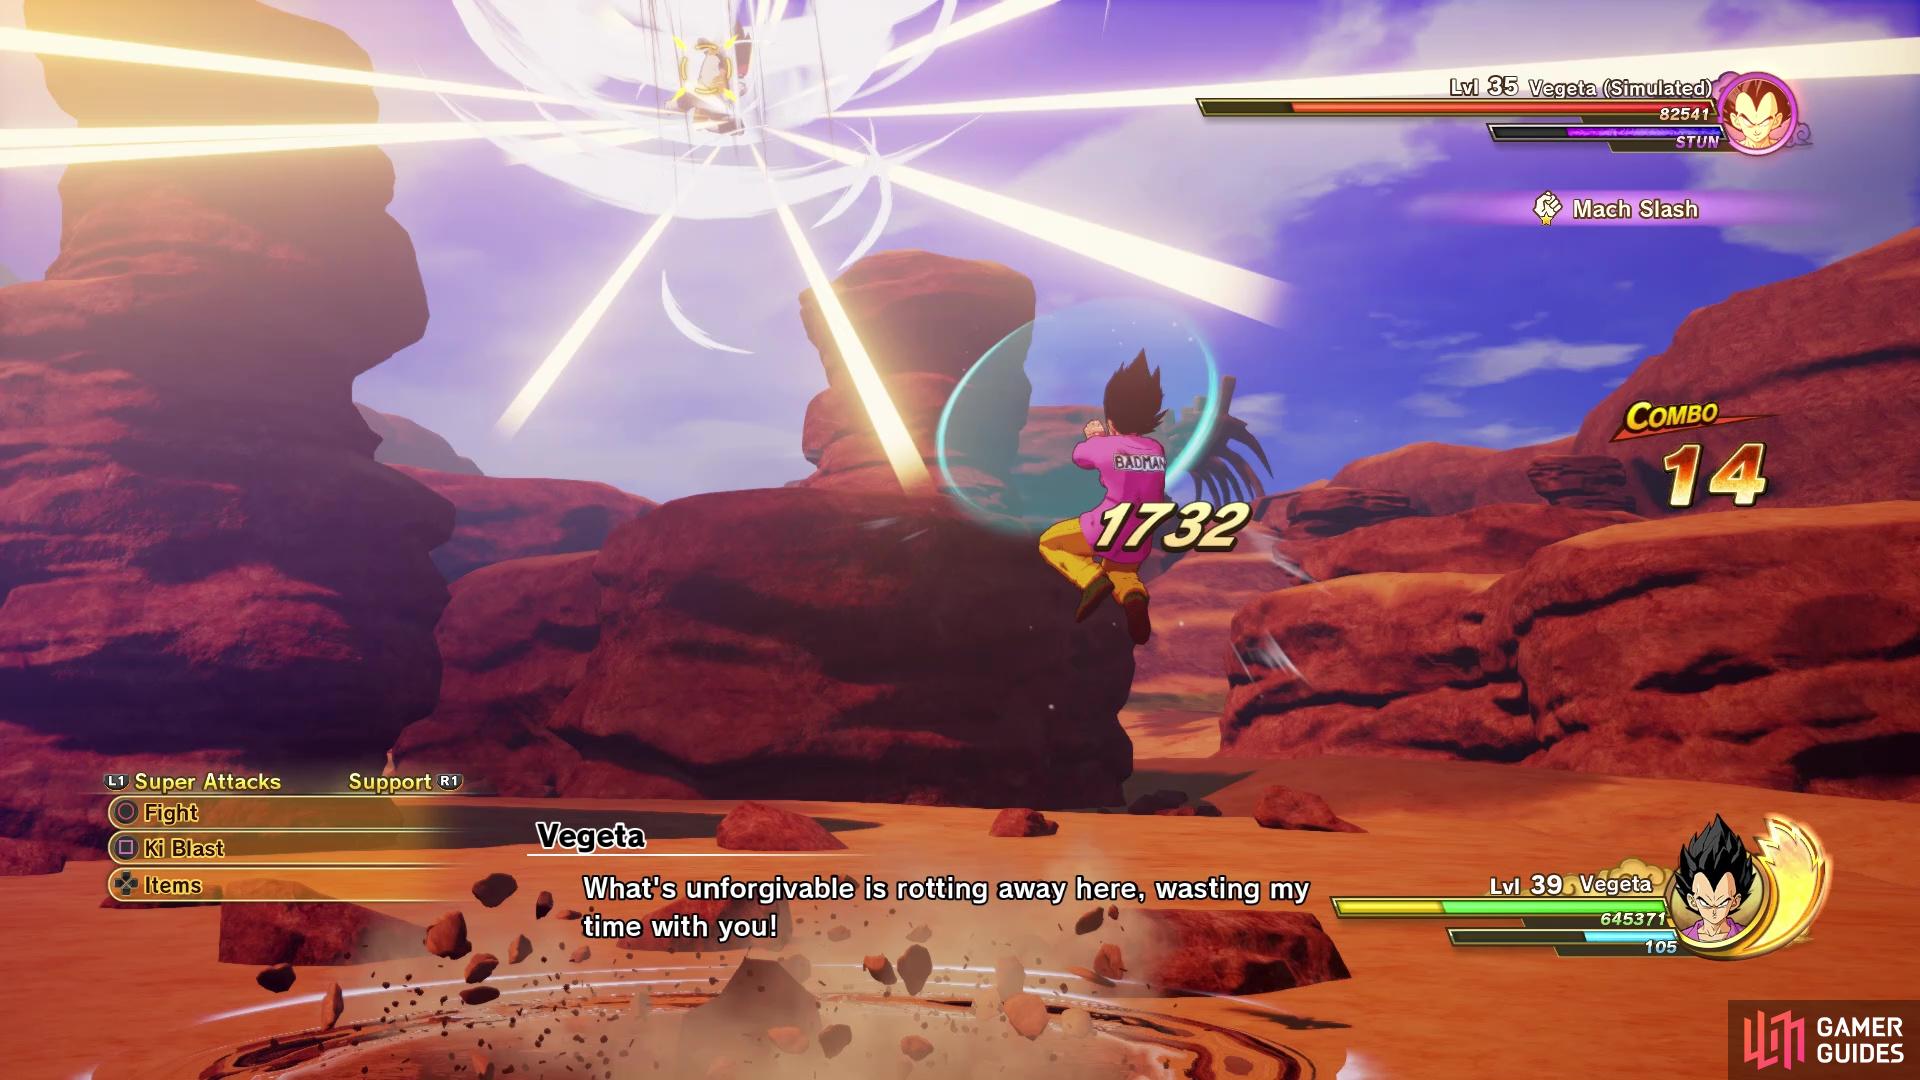 Raditz screenshots, images and pictures - Giant Bomb